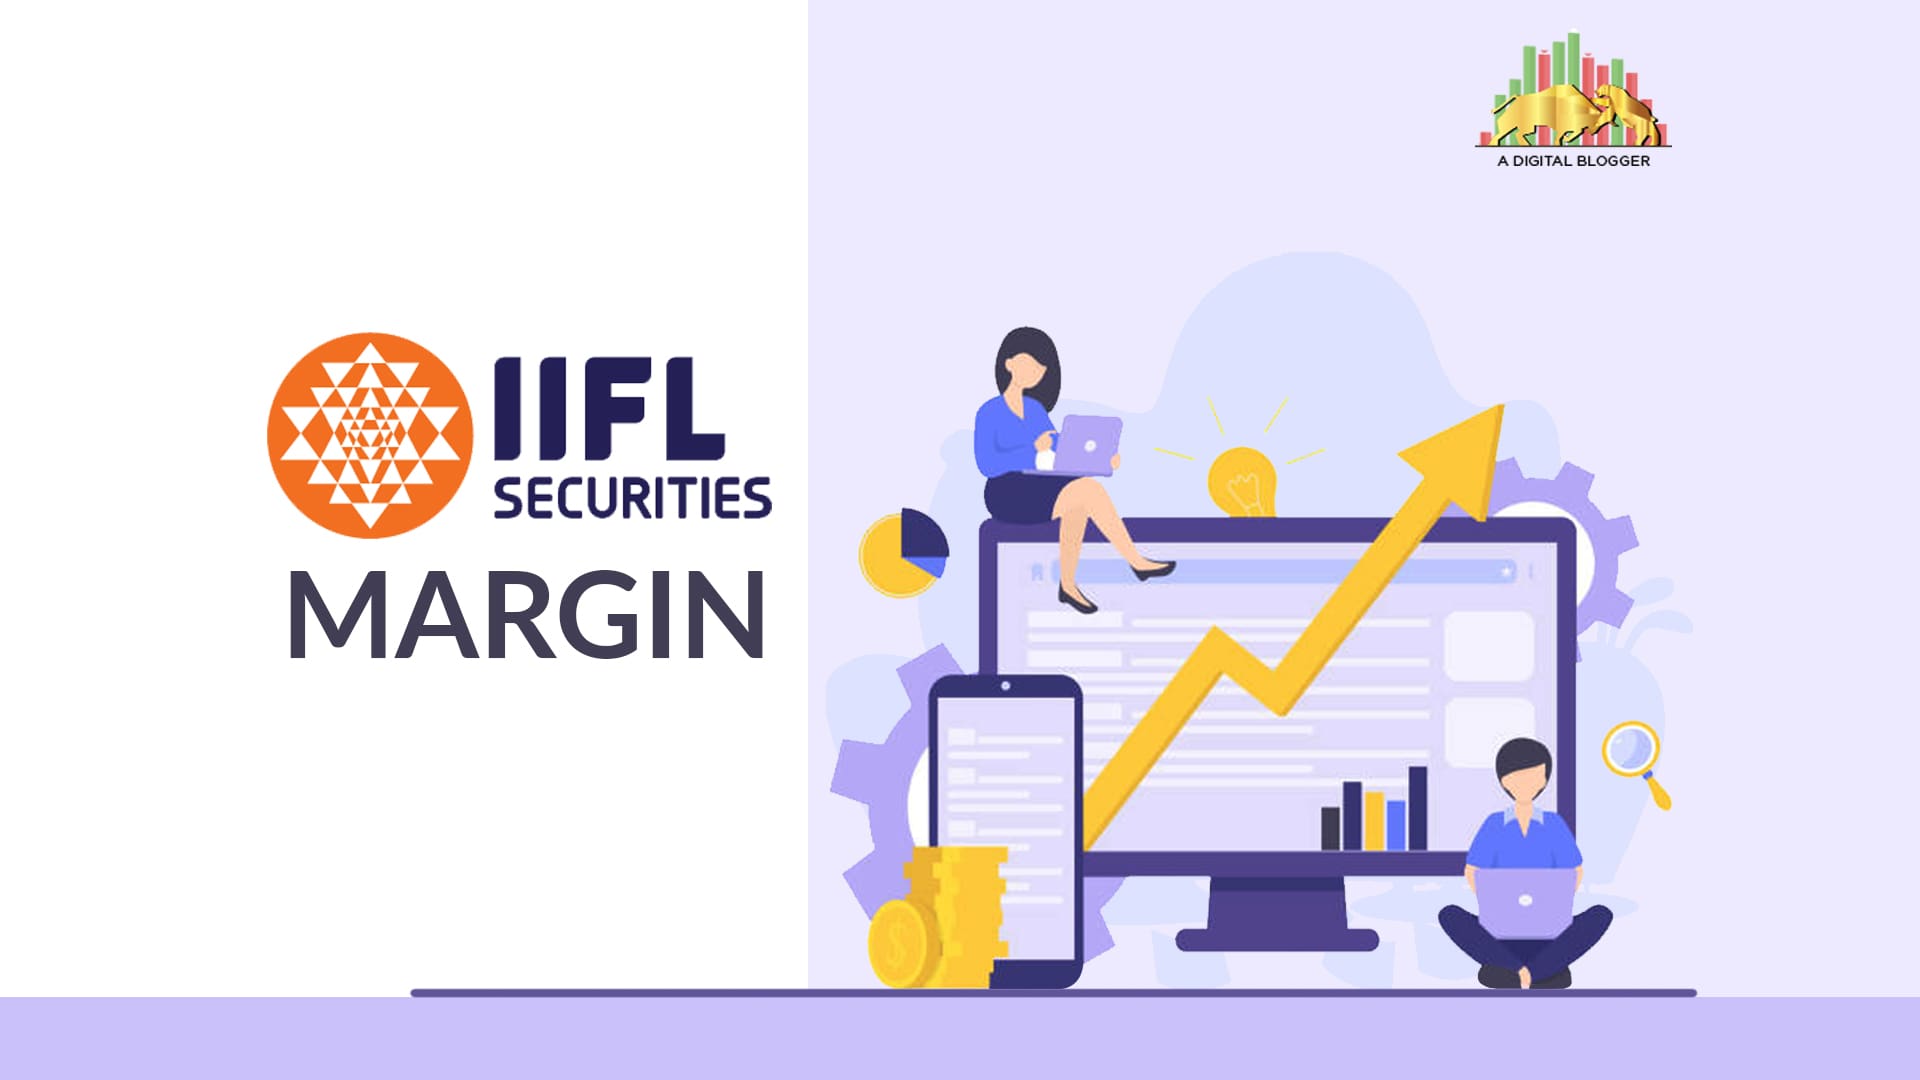 IIFL Margin | Review, Trading, Limit, Charges, Funding